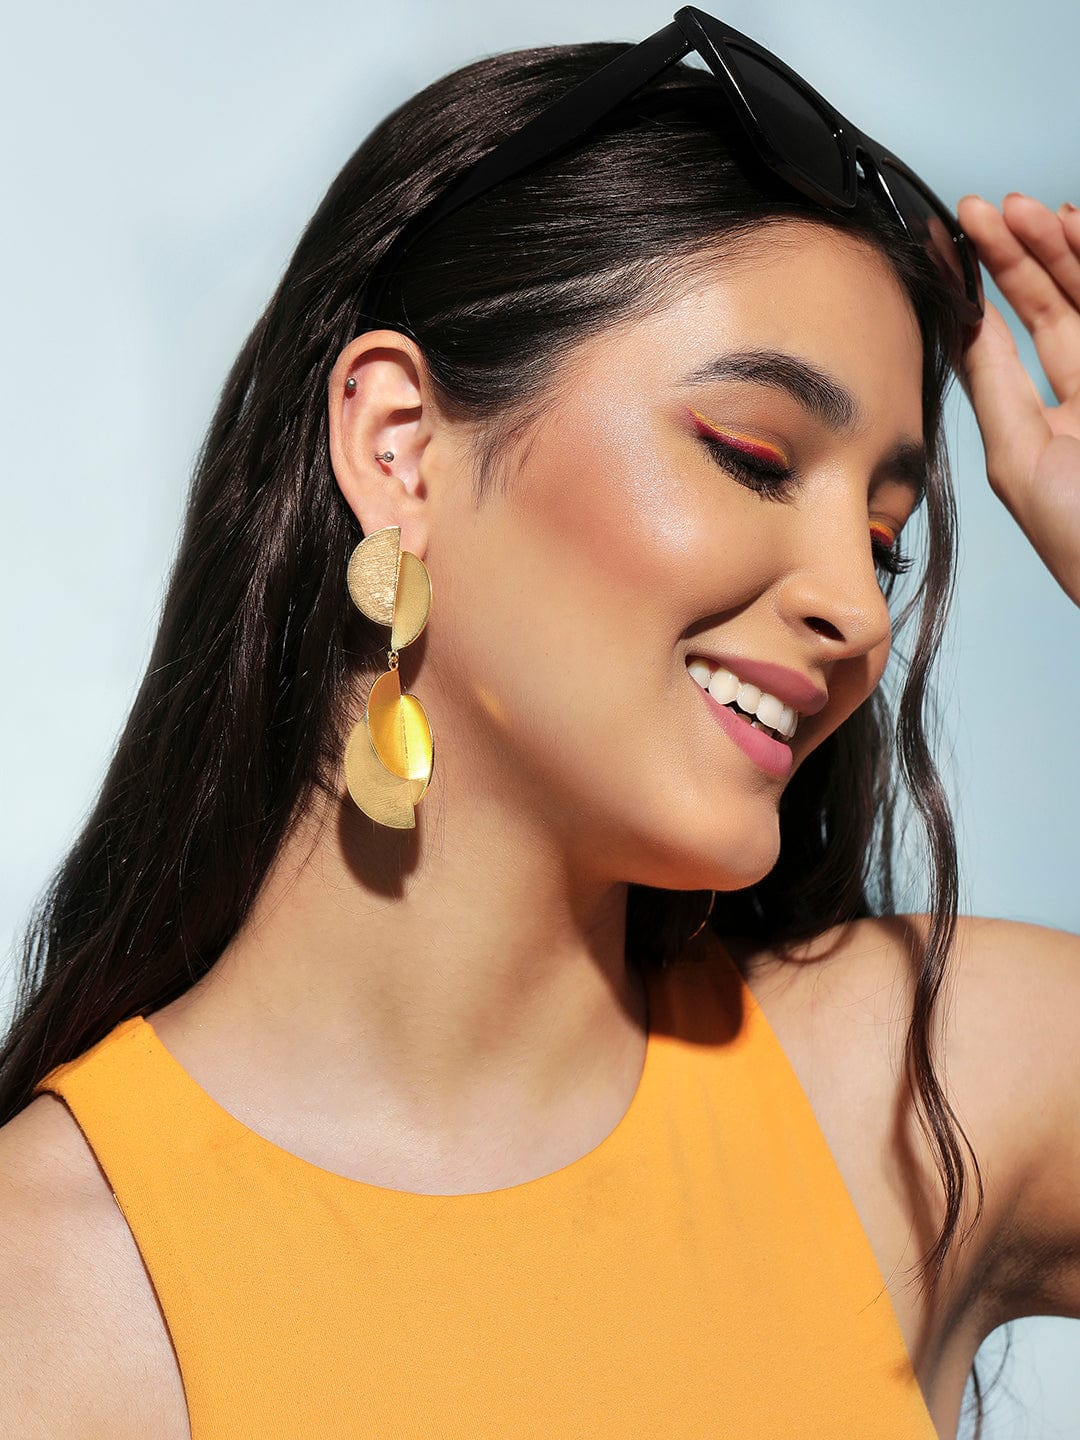 Rubans Voguish 24k Gold Plated Earrings With Stunning Unique Design Earrings